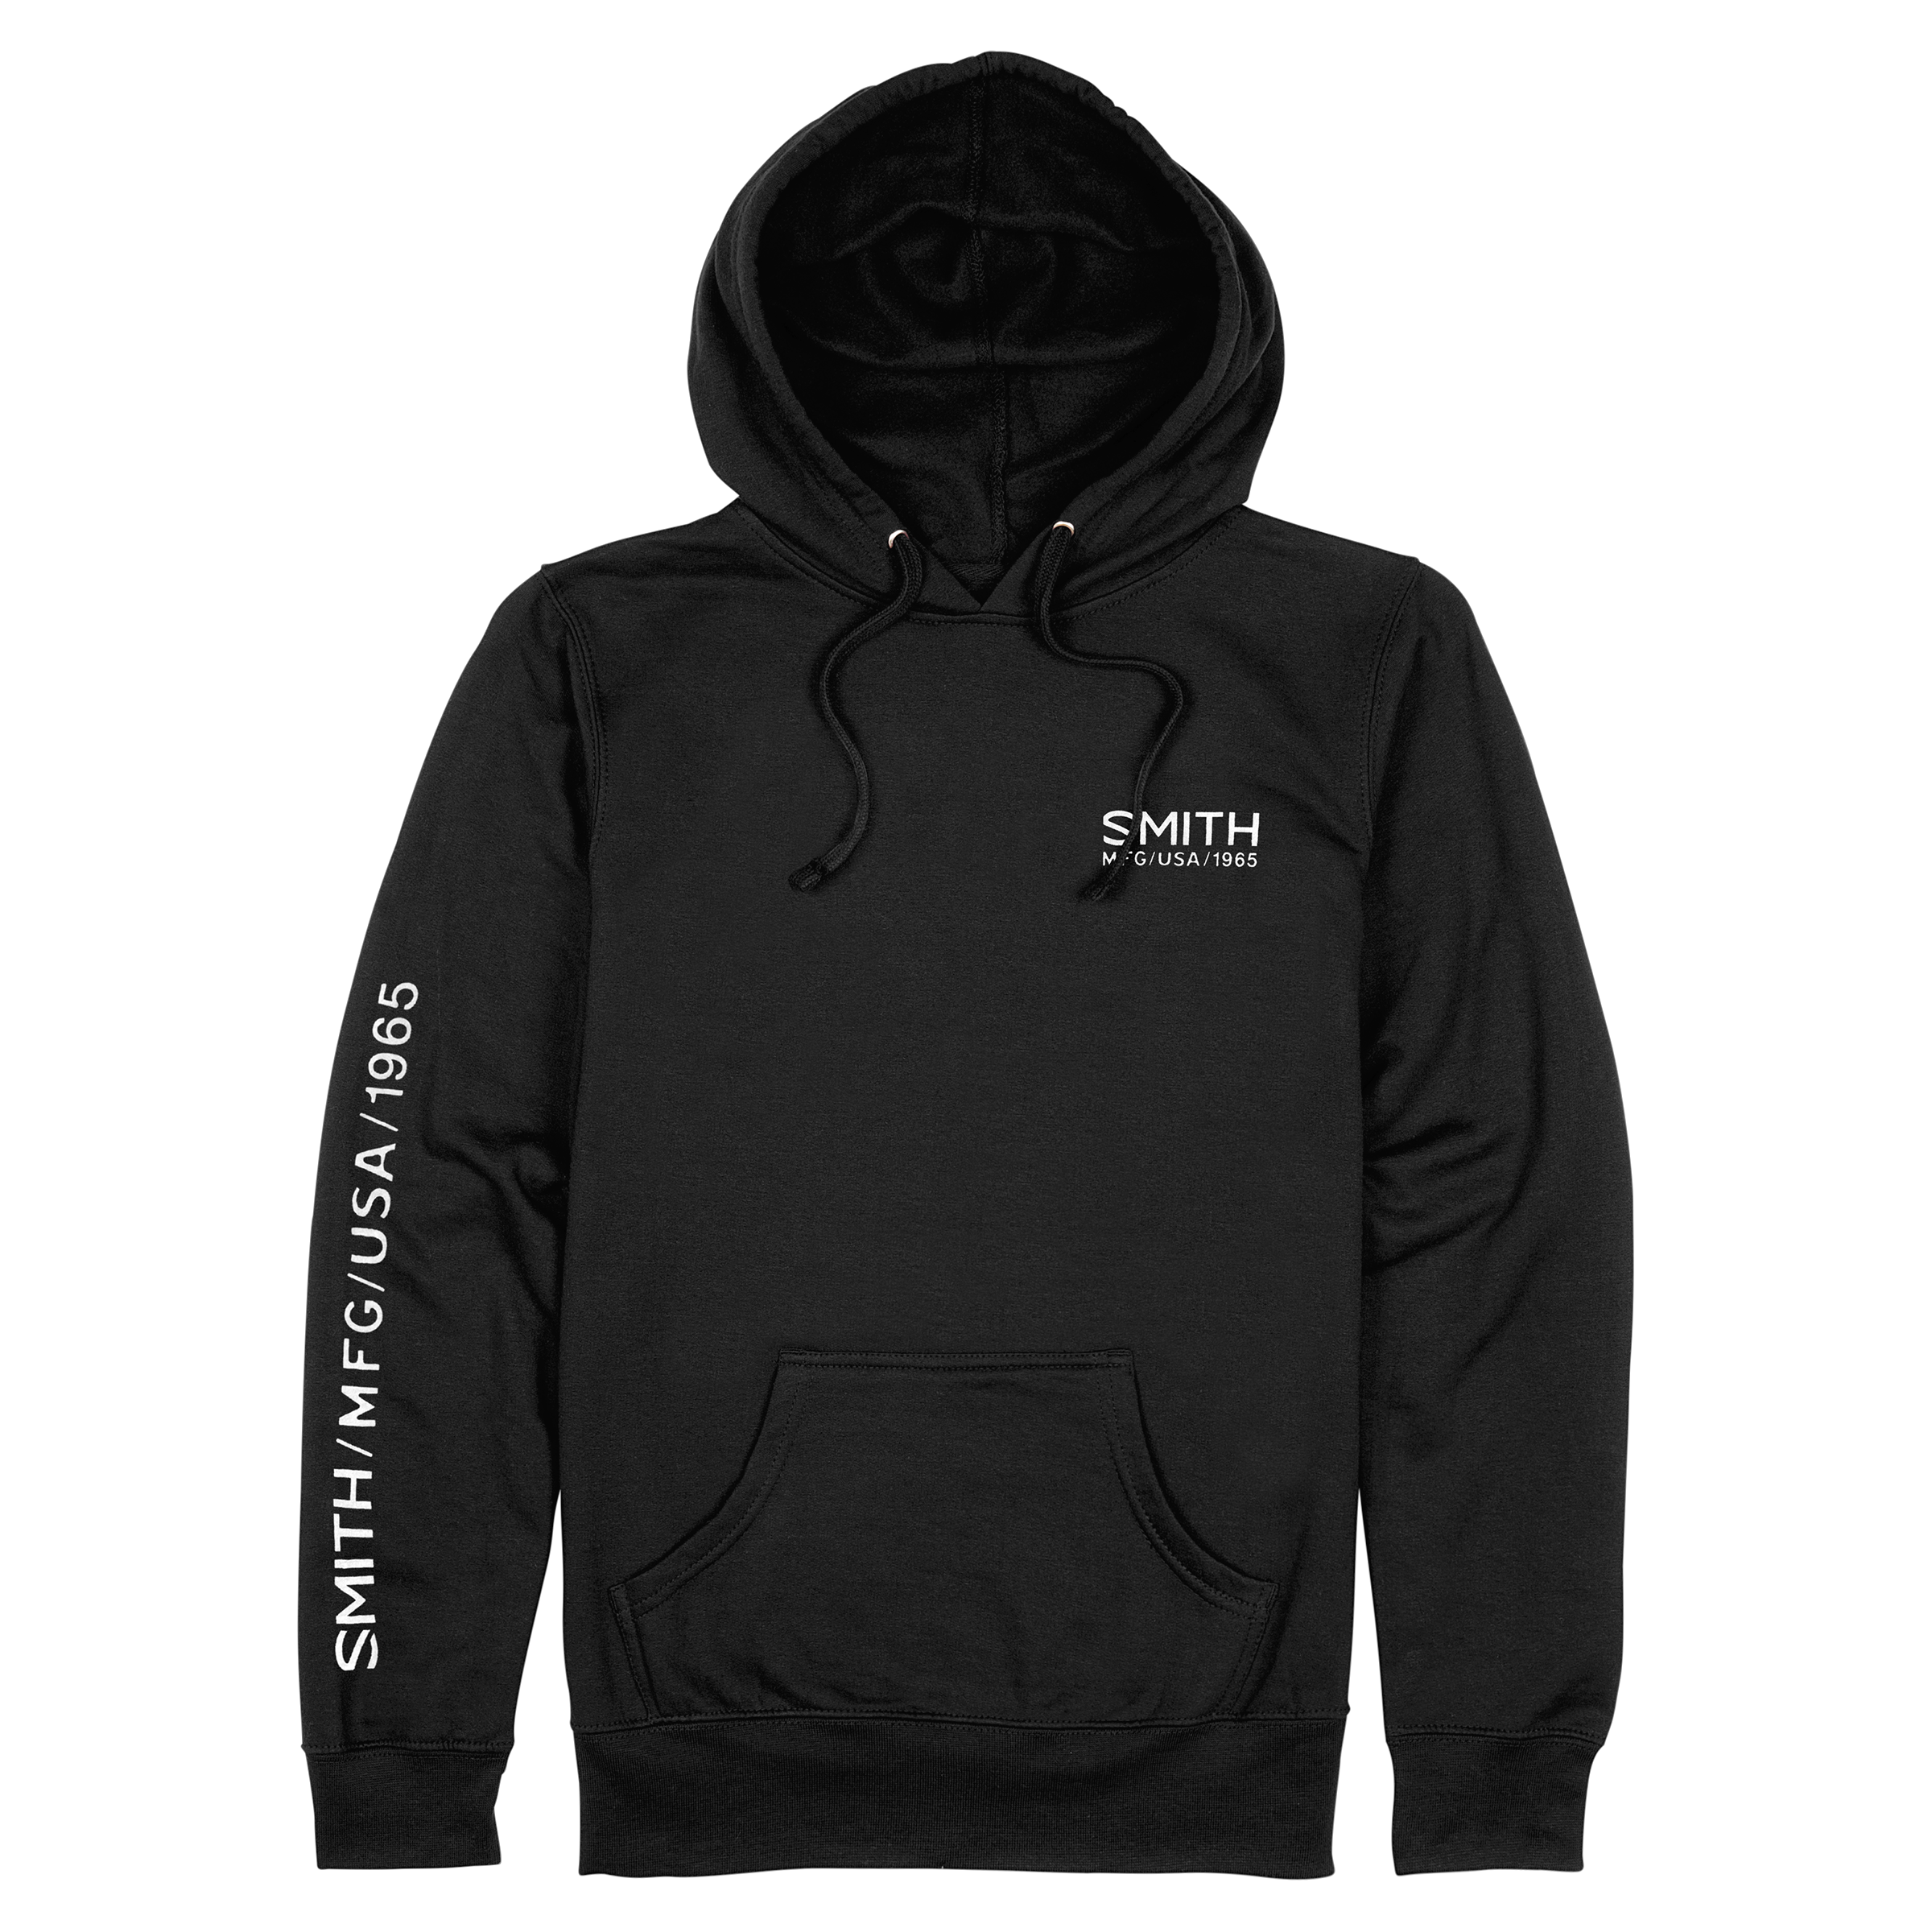 Buy Issue Hoodie starting at USD 56.00 | Smith Optics